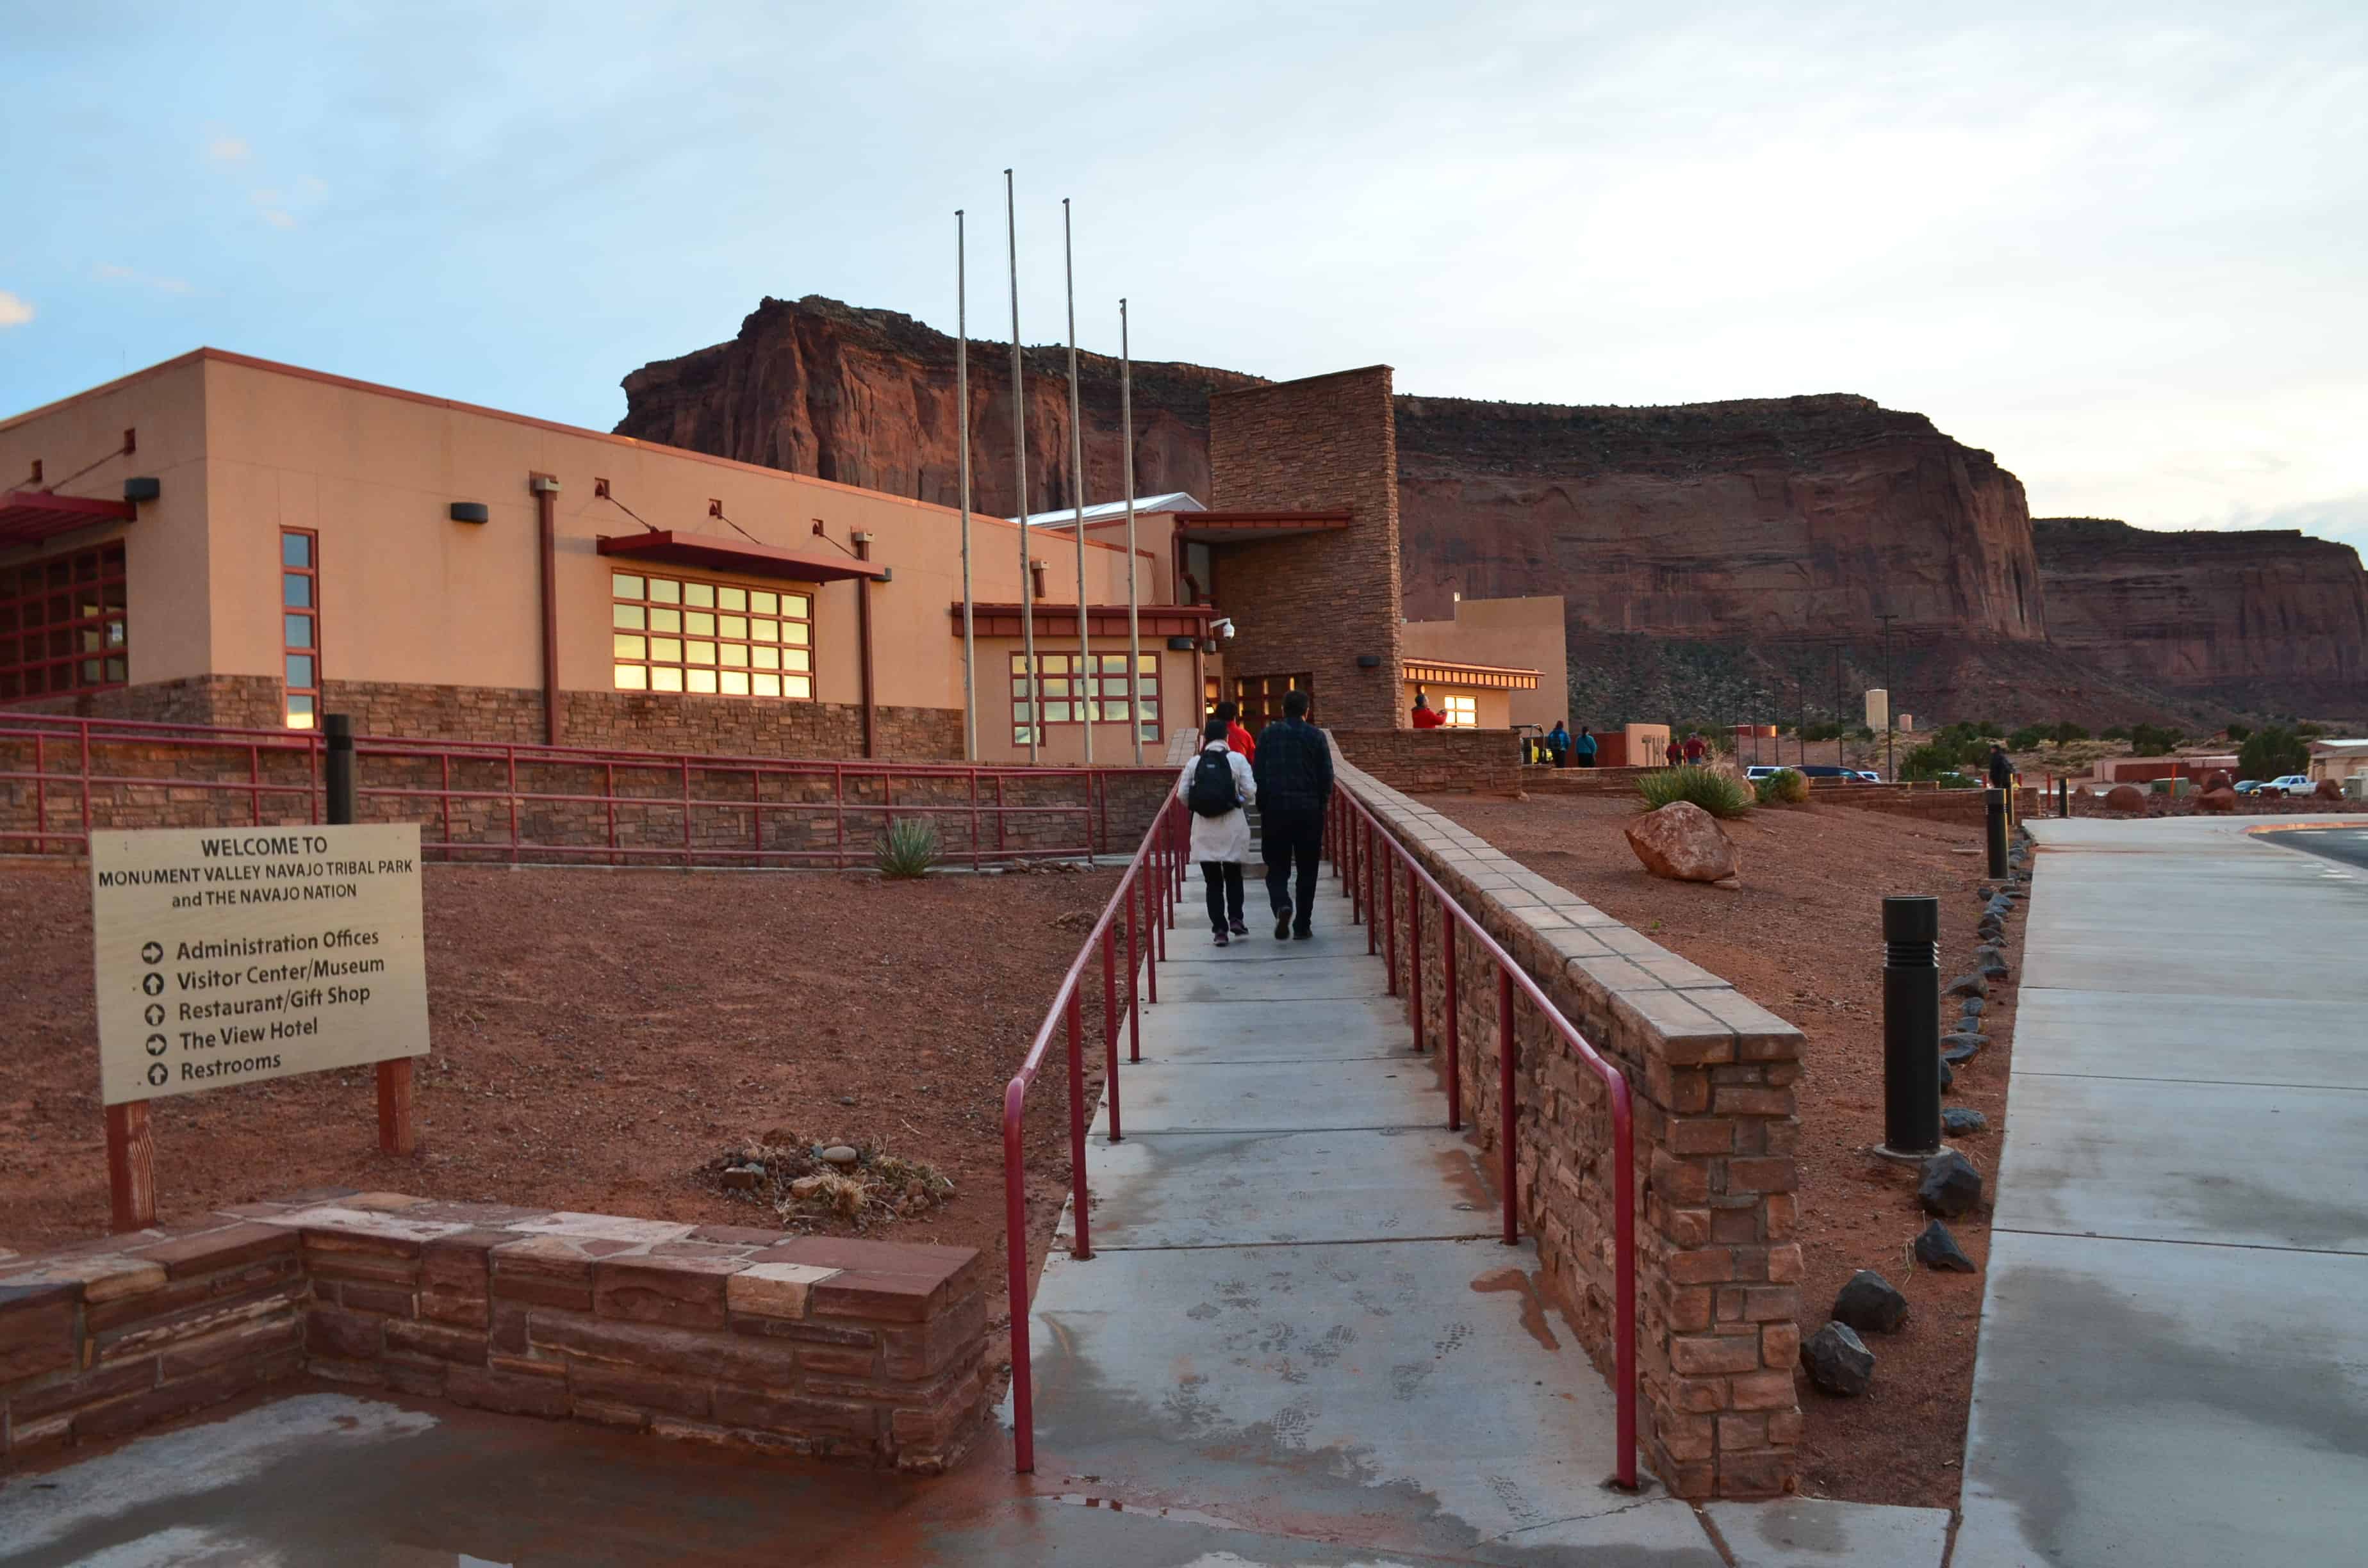 Visitor center at Monument Valley Tribal Park in Arizona